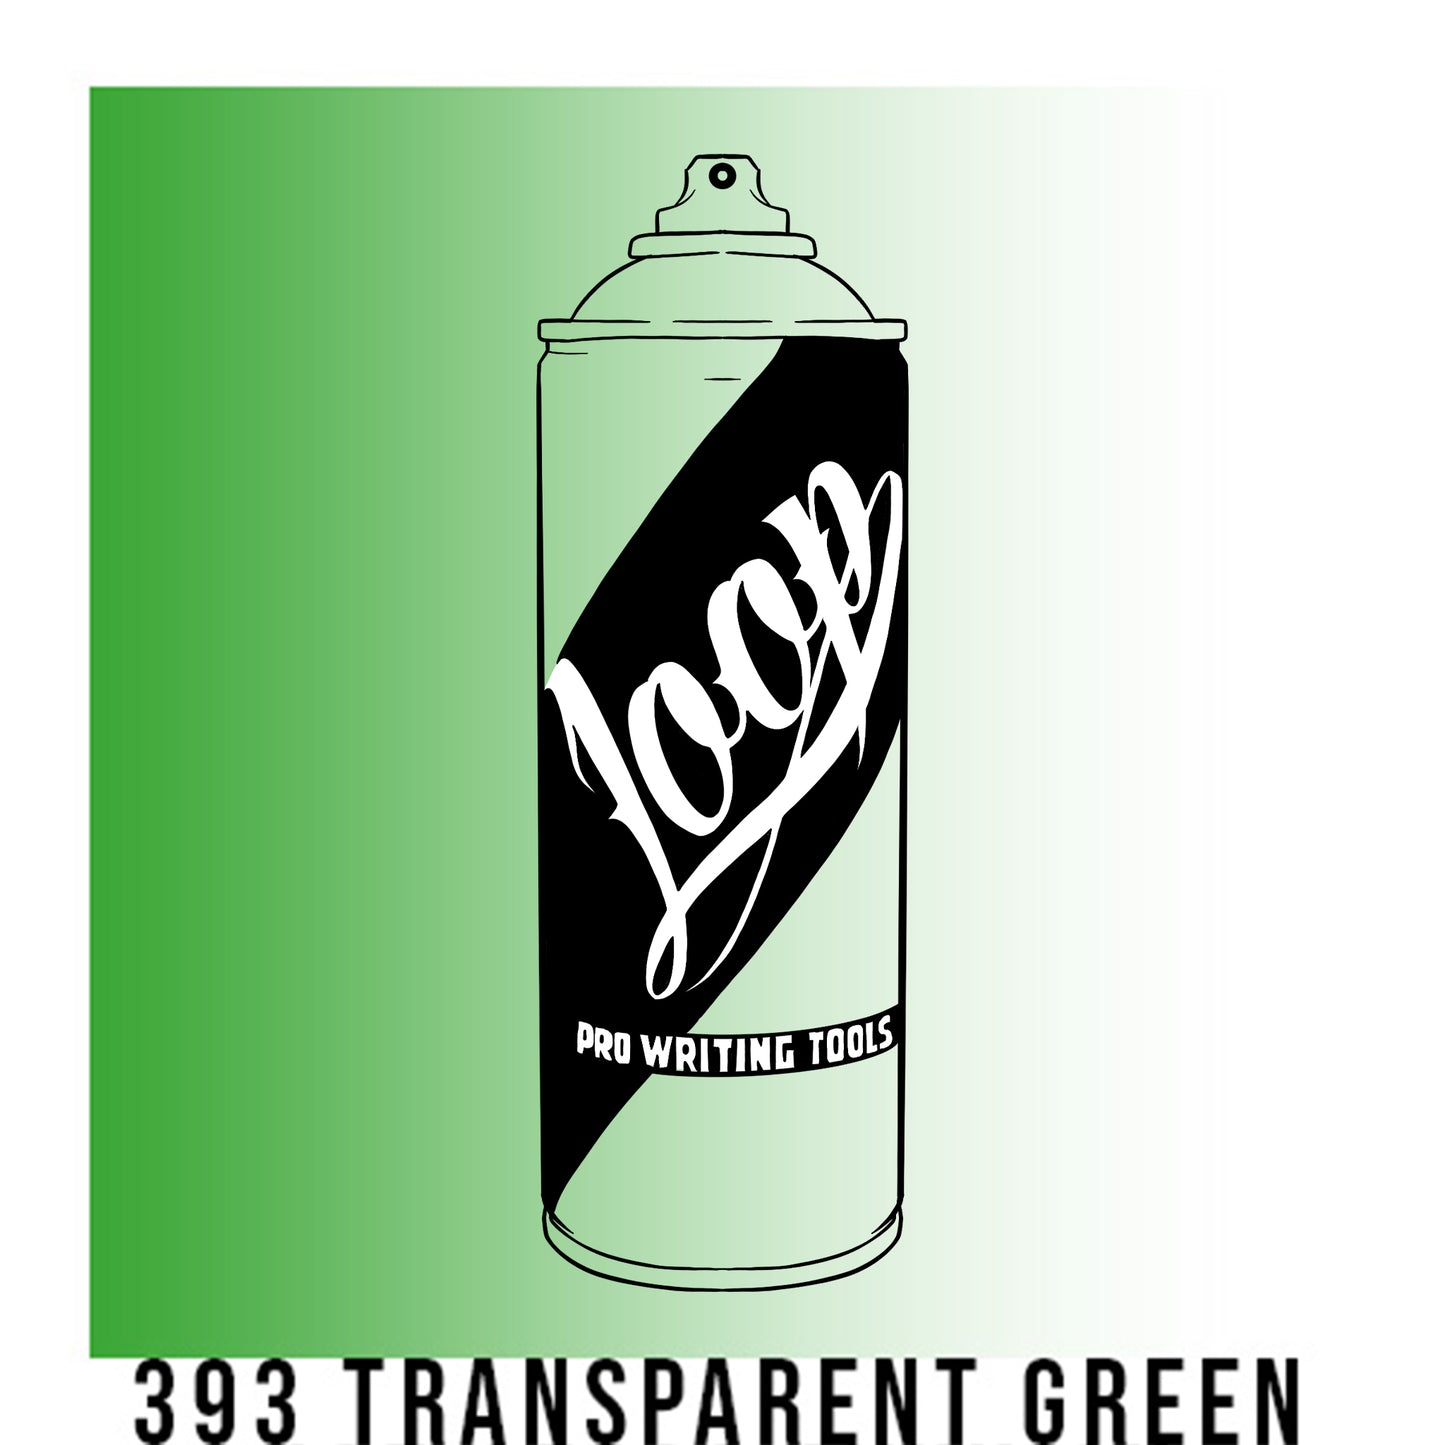 A black outline drawing of a green to white gradient spray paint can with the word "Loop" written on the face in script. The background is a color swatch of the same green to white gradient with a white border with the words "393 Transparent Green" at the bottom.